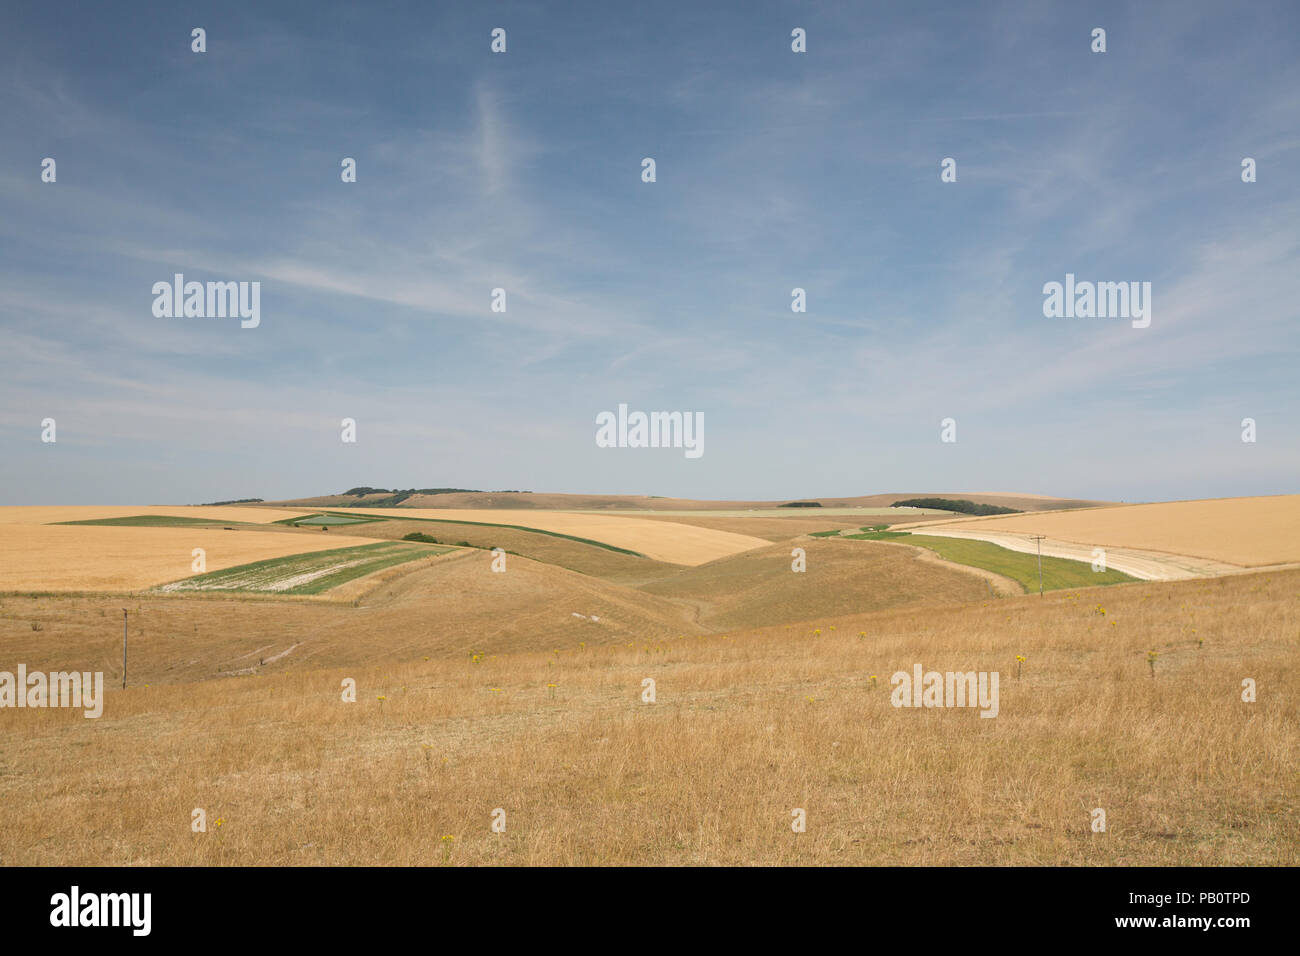 A view of the Wiltshire landscape above the small town of Mere during the UK 2018 heatwave showing dried grass and farmers’ crops in fields. Wiltshire Stock Photo